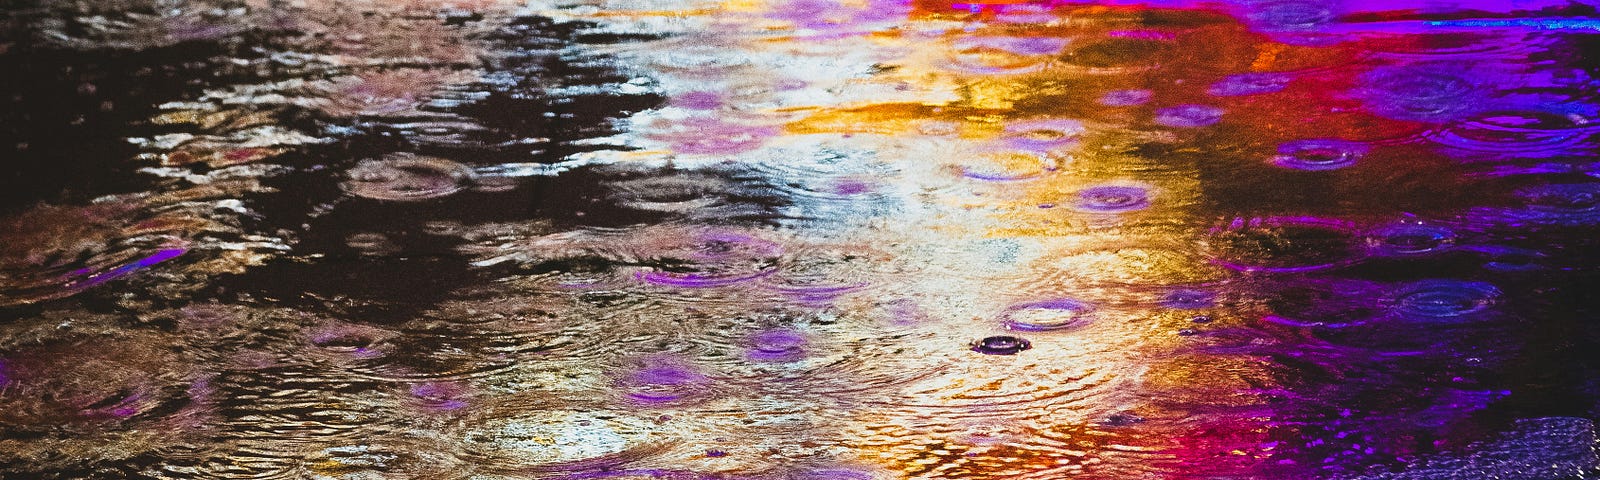 a puddle that is a bit grainy looking with a dim spectrum of colour: purple, pink, red, orange, yellow, and white